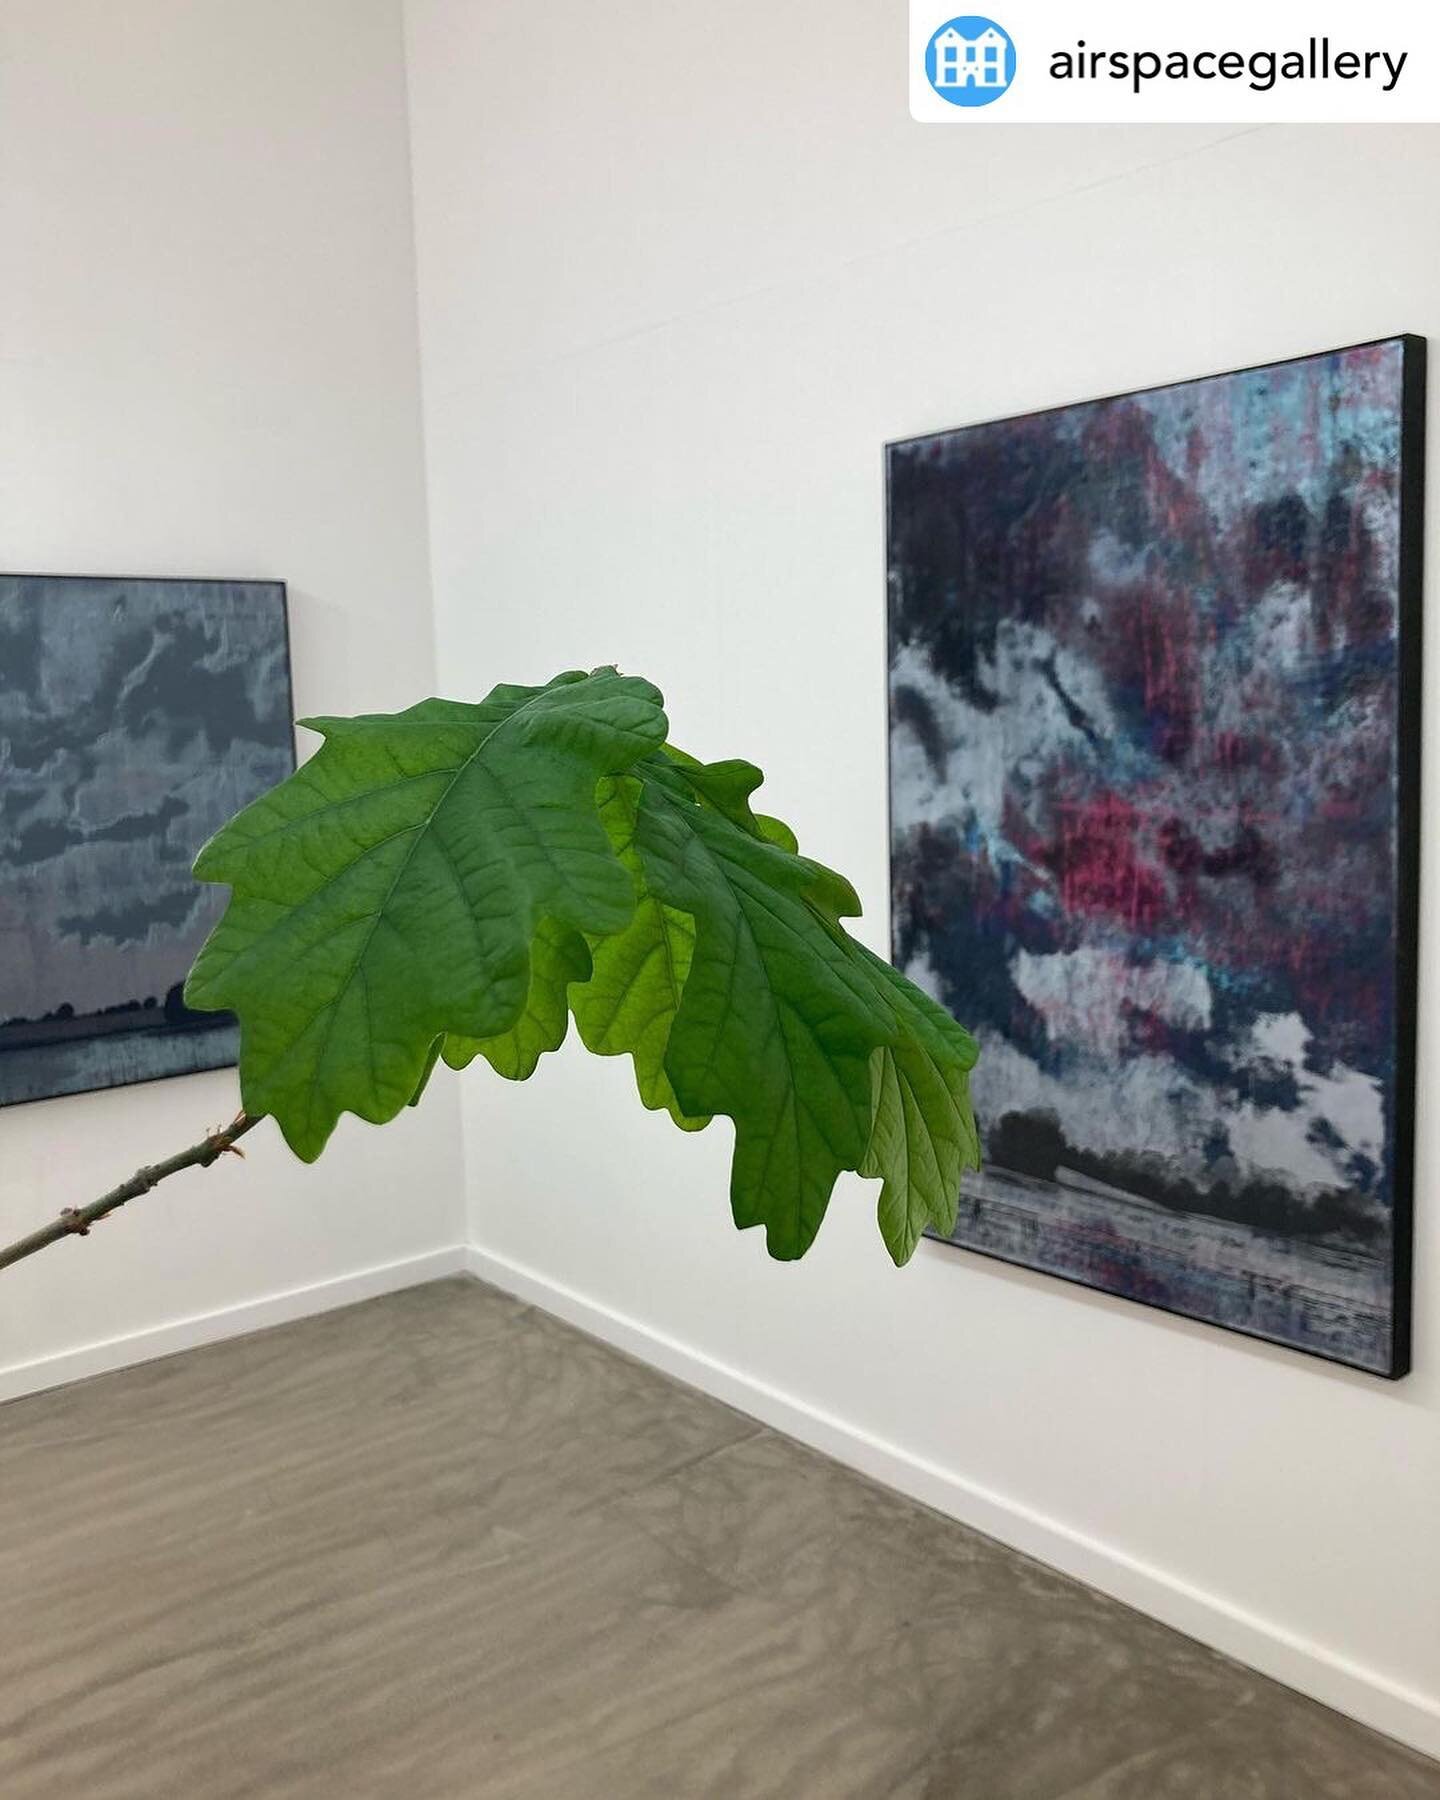 Reposting @airspacegallery It&rsquo;s the last week of @harryadamsofficial Collider Part 4 - come and see these wonderful paintings and their arboreal partners - 12-5 all week until. Sunday 10th